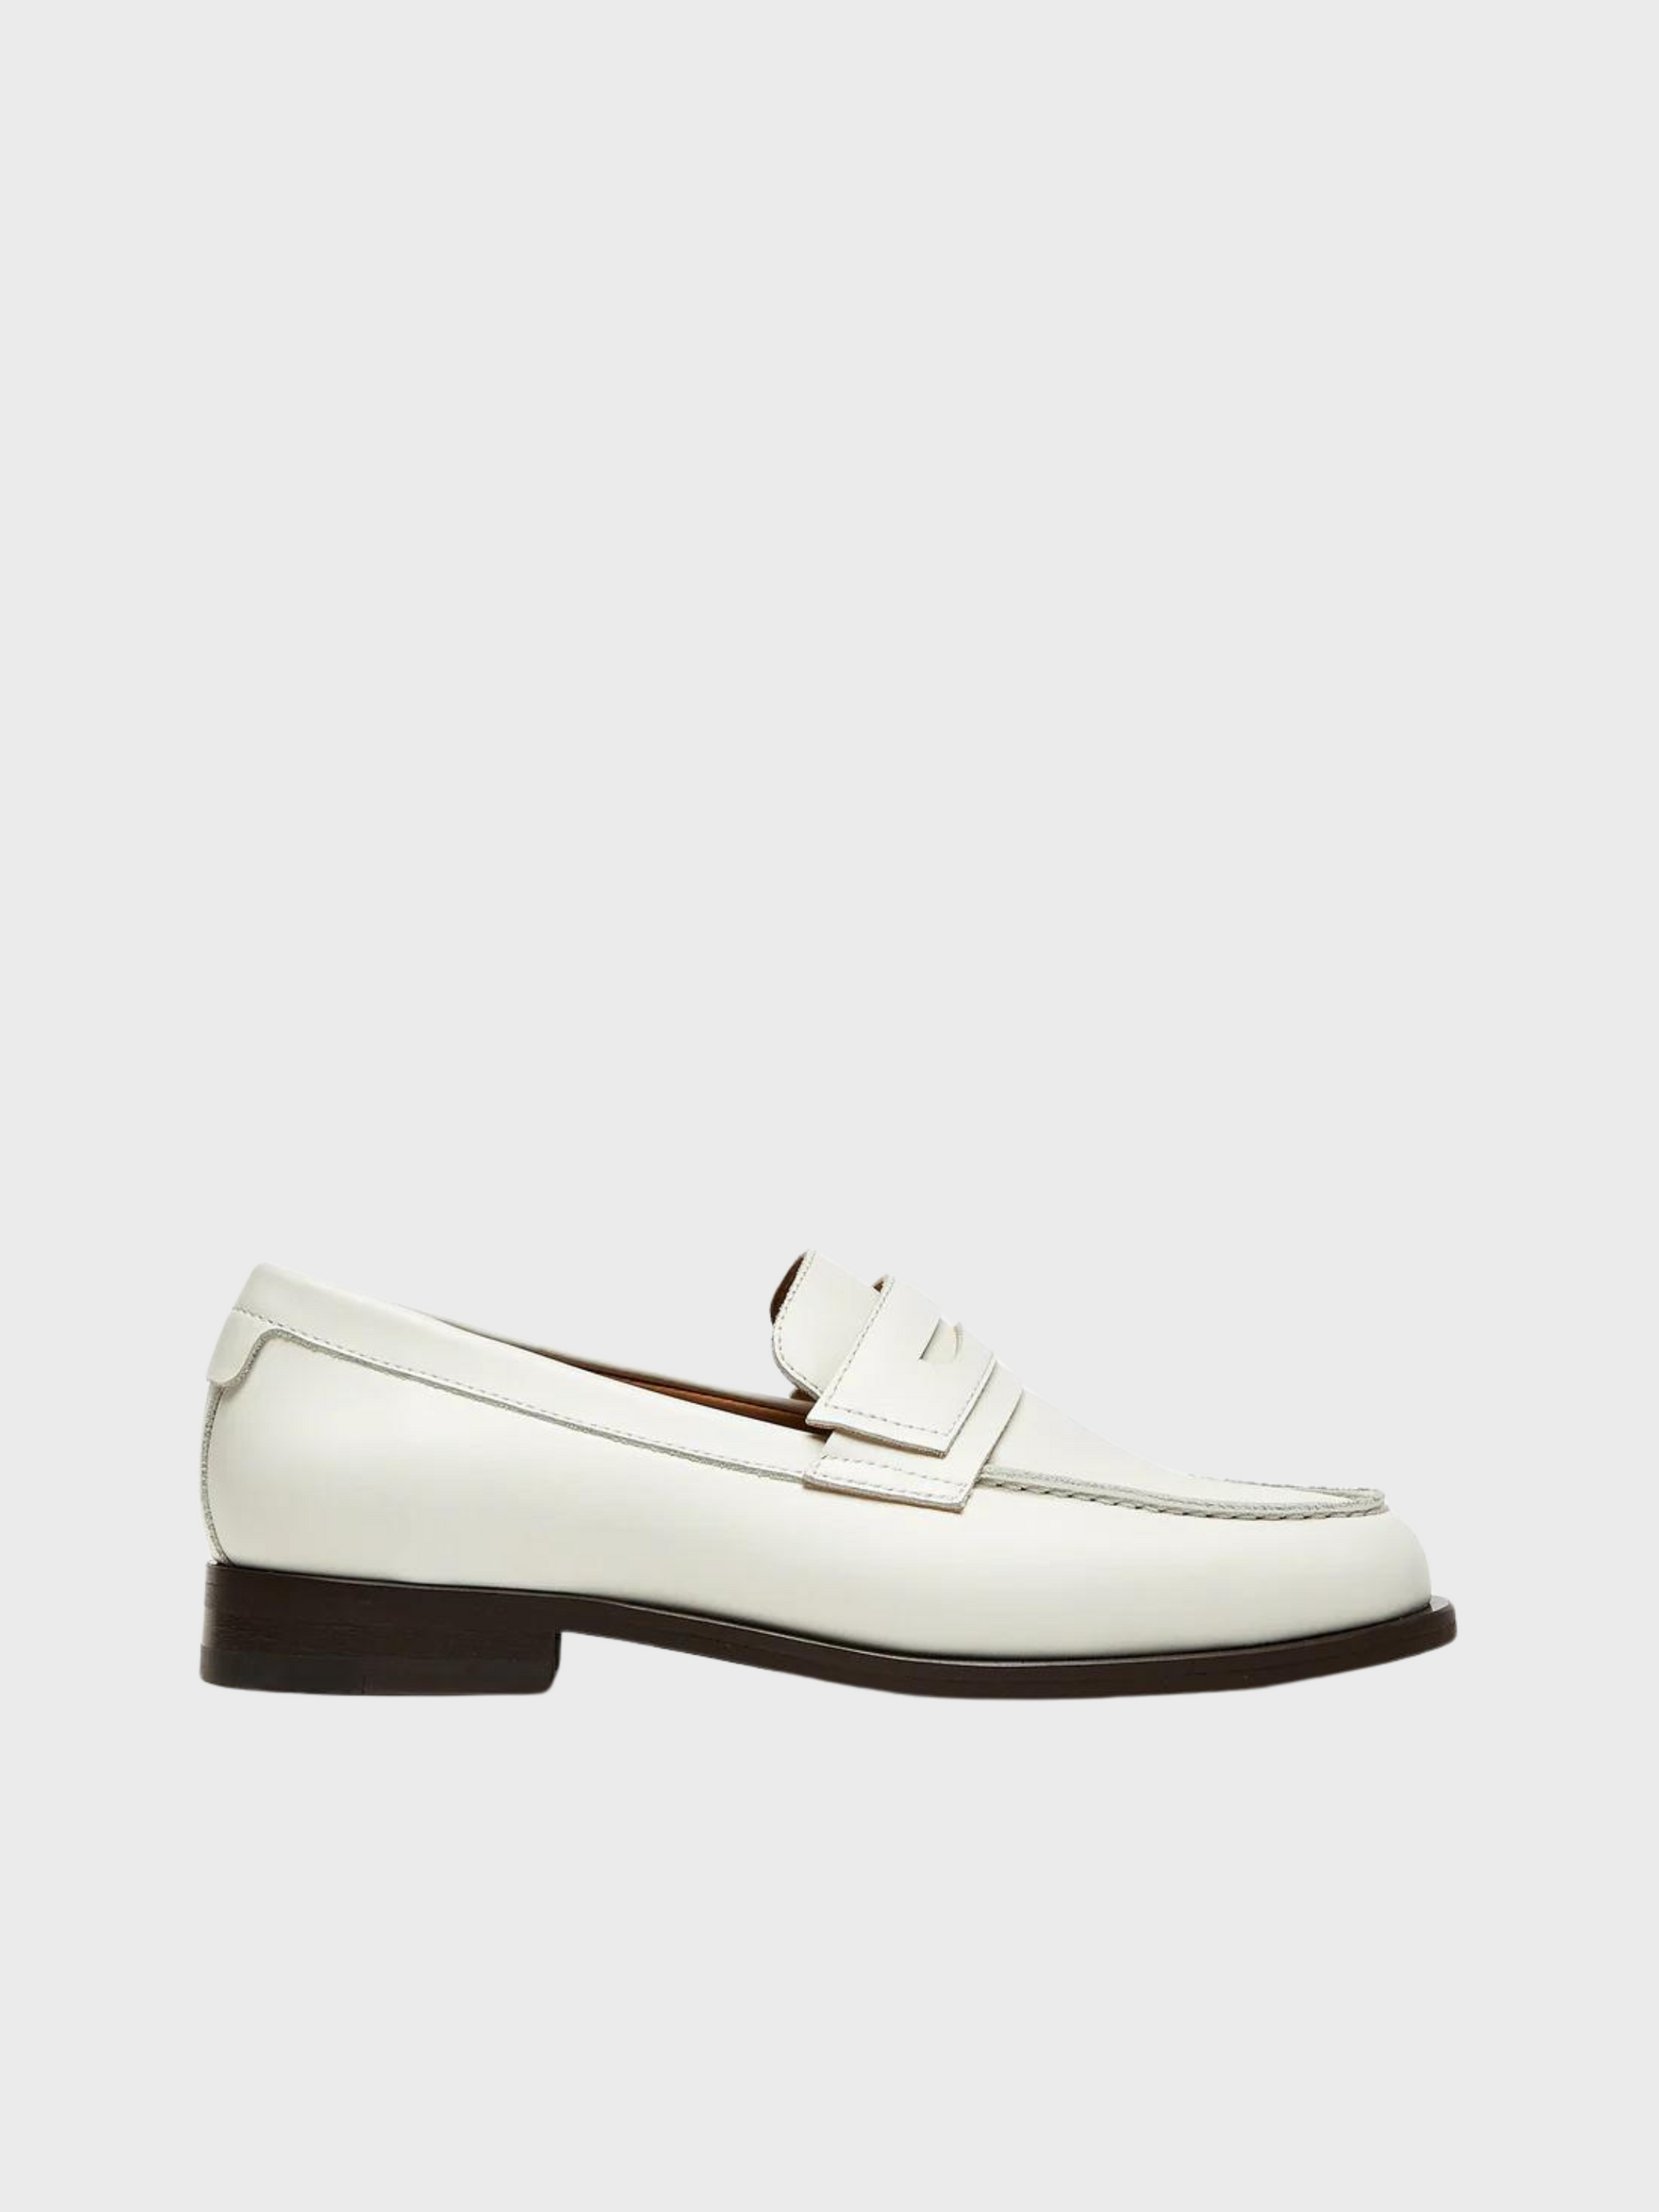 Sister Soeur Mavis Loafer Cream-Sneakers-West of Woodward Boutique-Vancouver-Canada